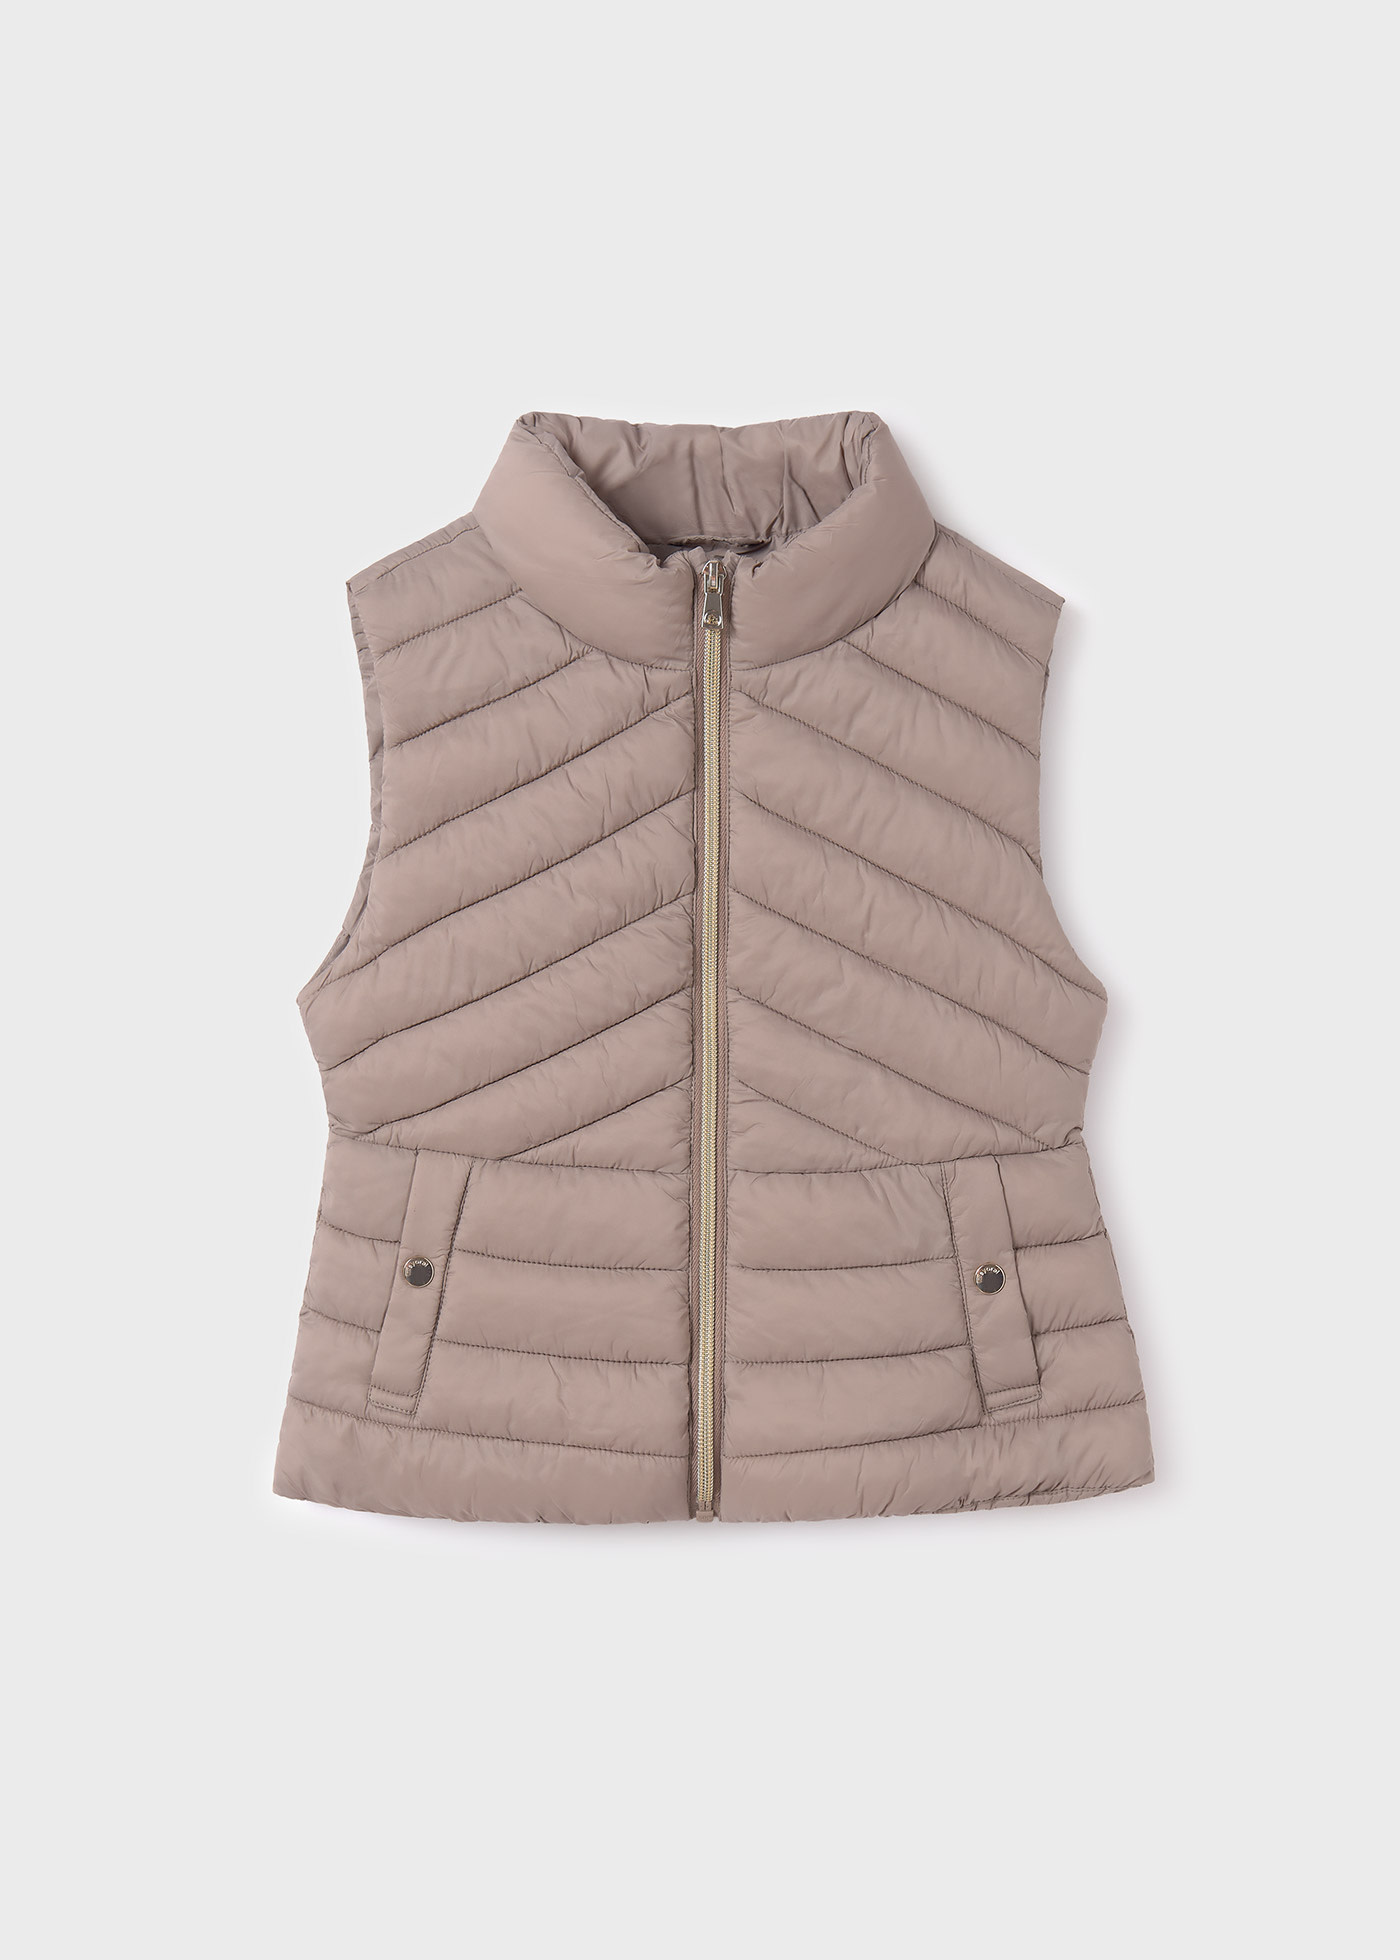 Padded vest recycled fibers girl | Mayoral ®